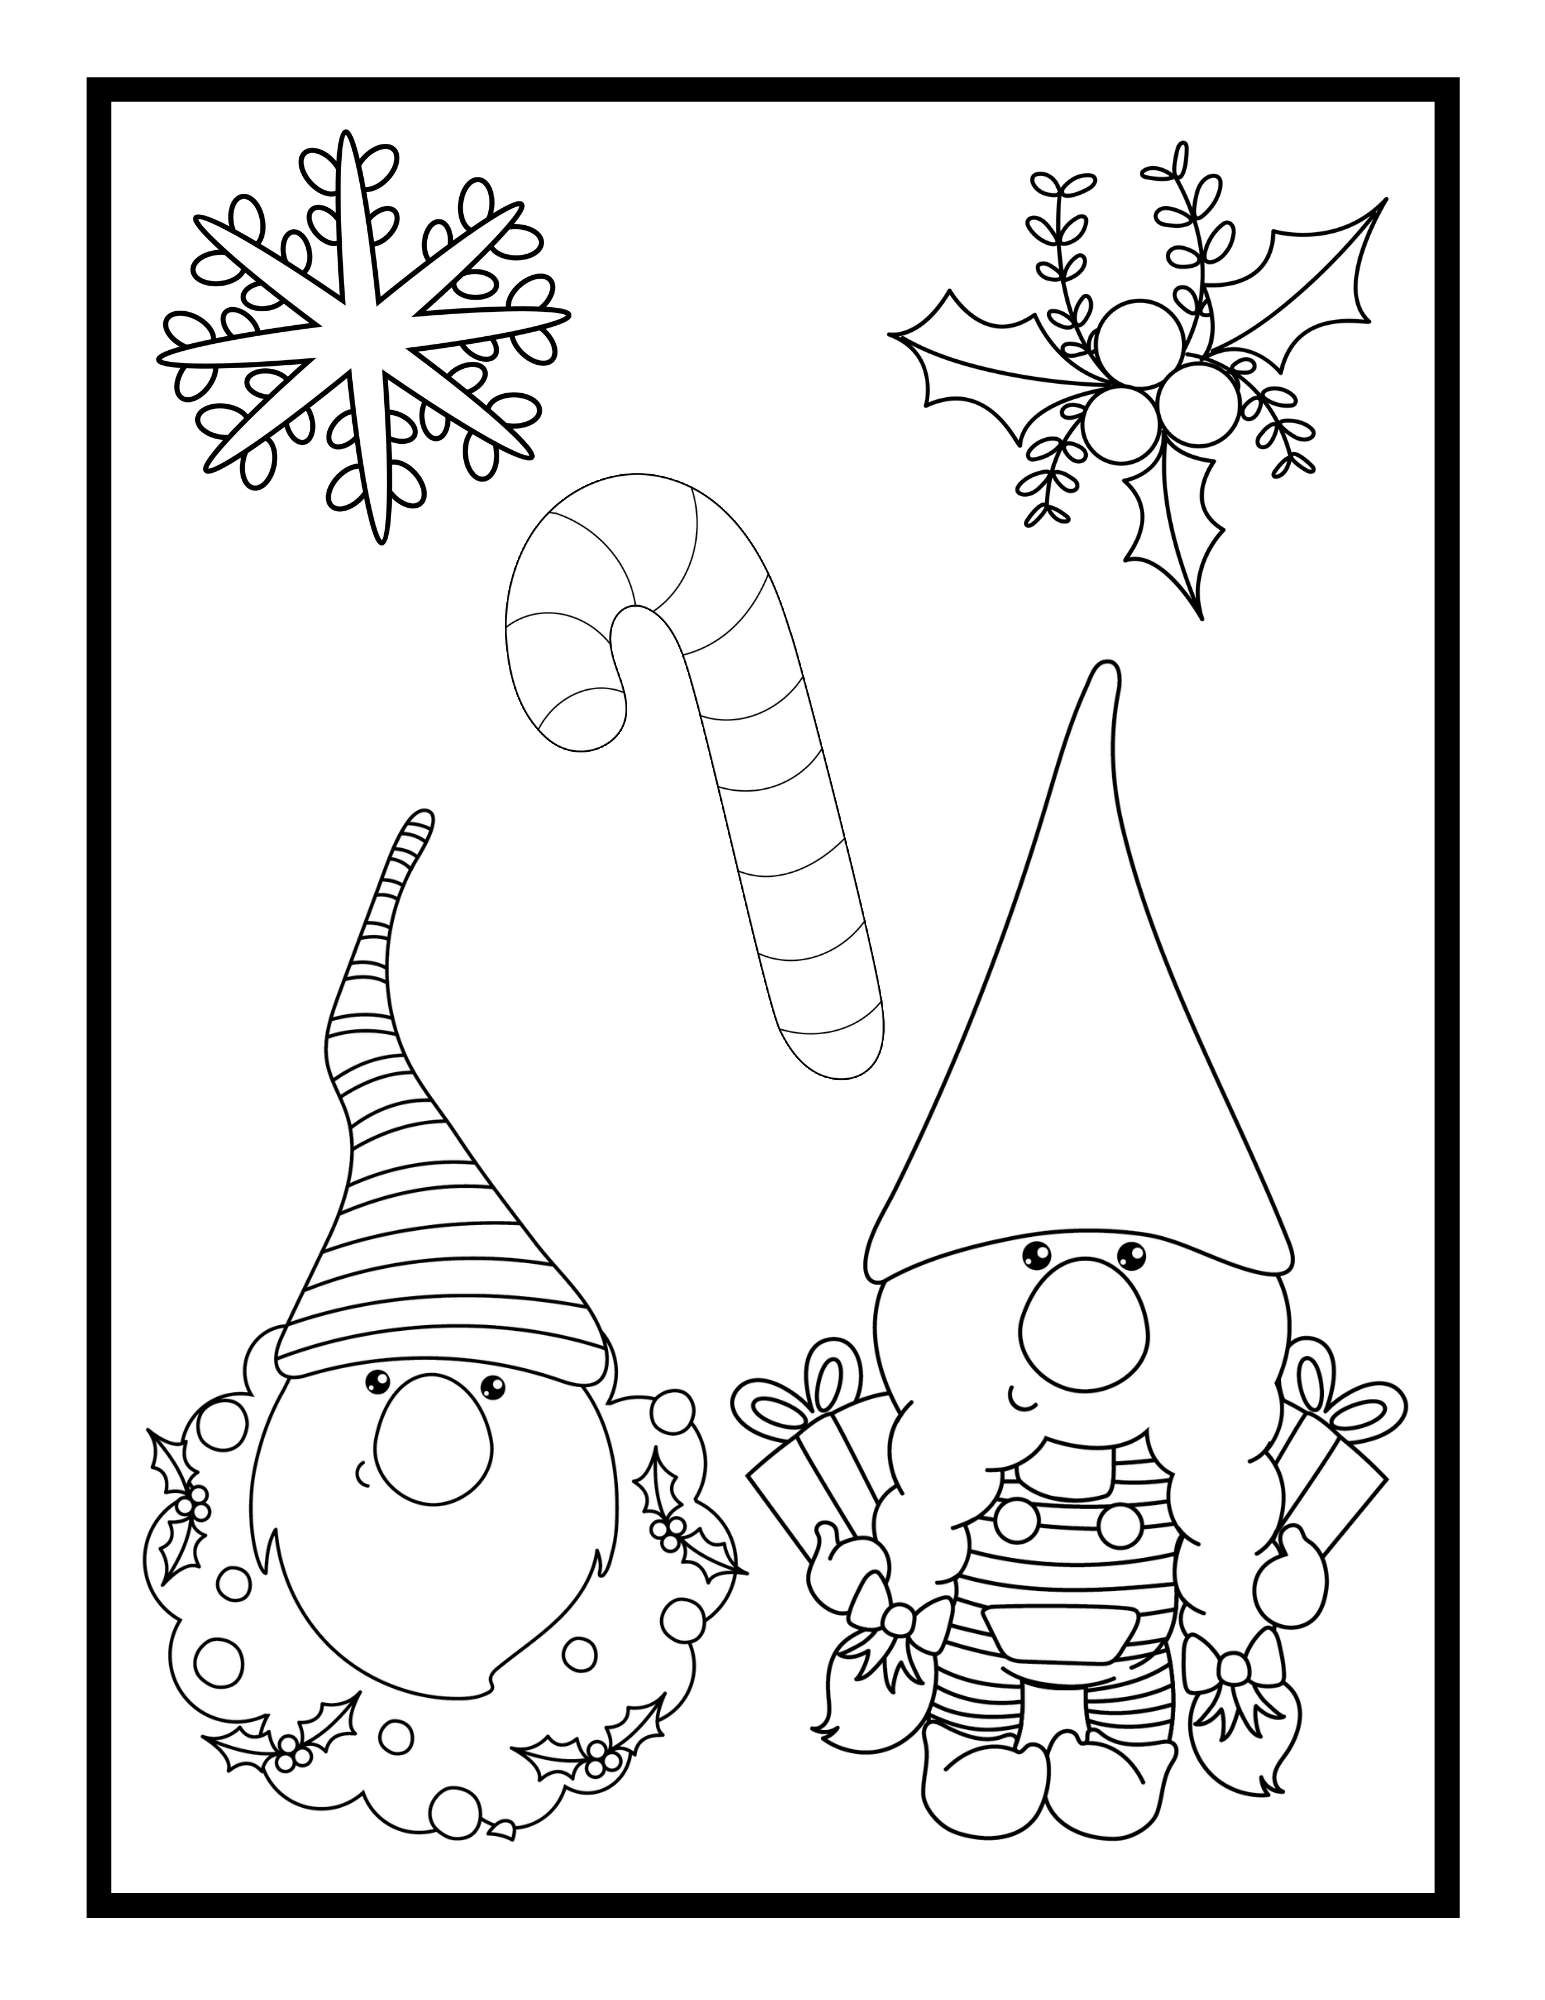 Free Cute Christmas Gnomes Coloring Pages That Kids Will Love ...